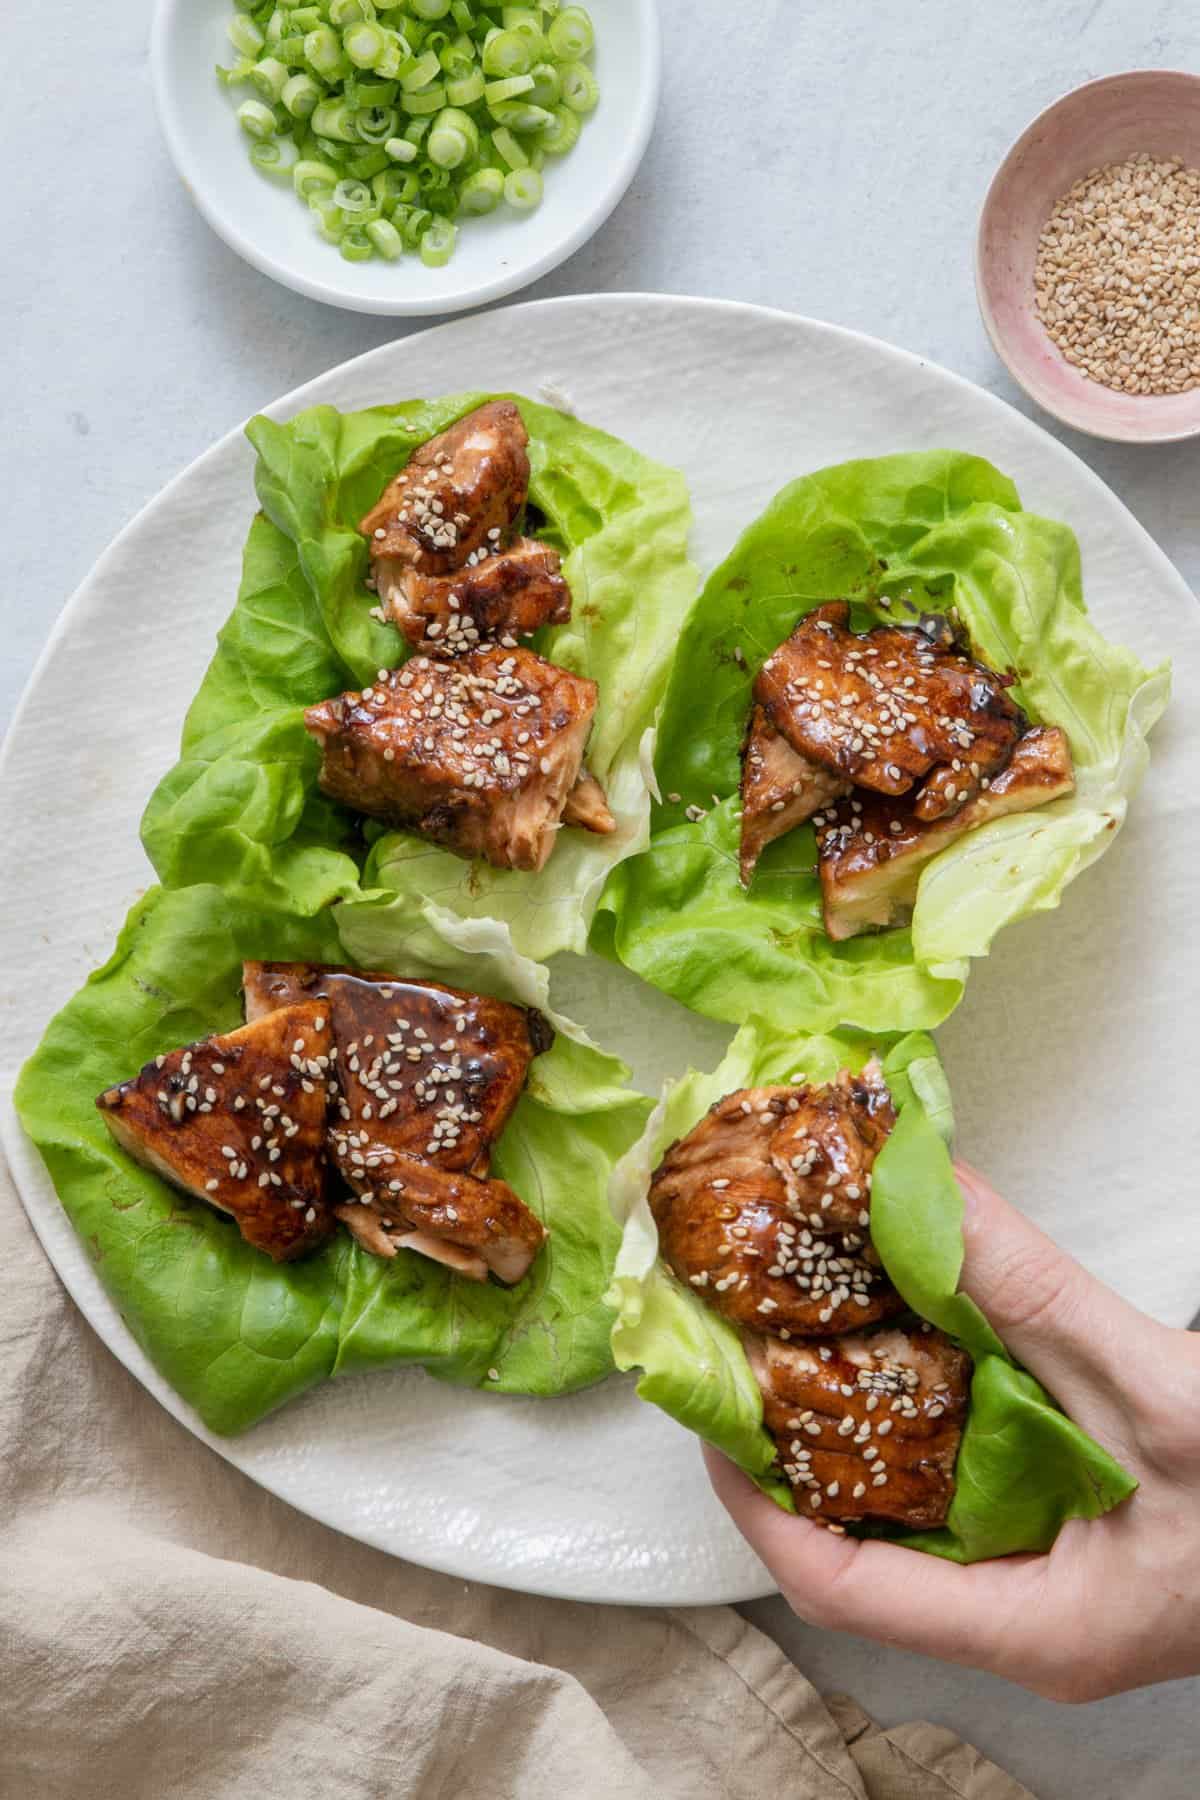 Hand grabbing lettuce wraps from plate with 3 more on plate.